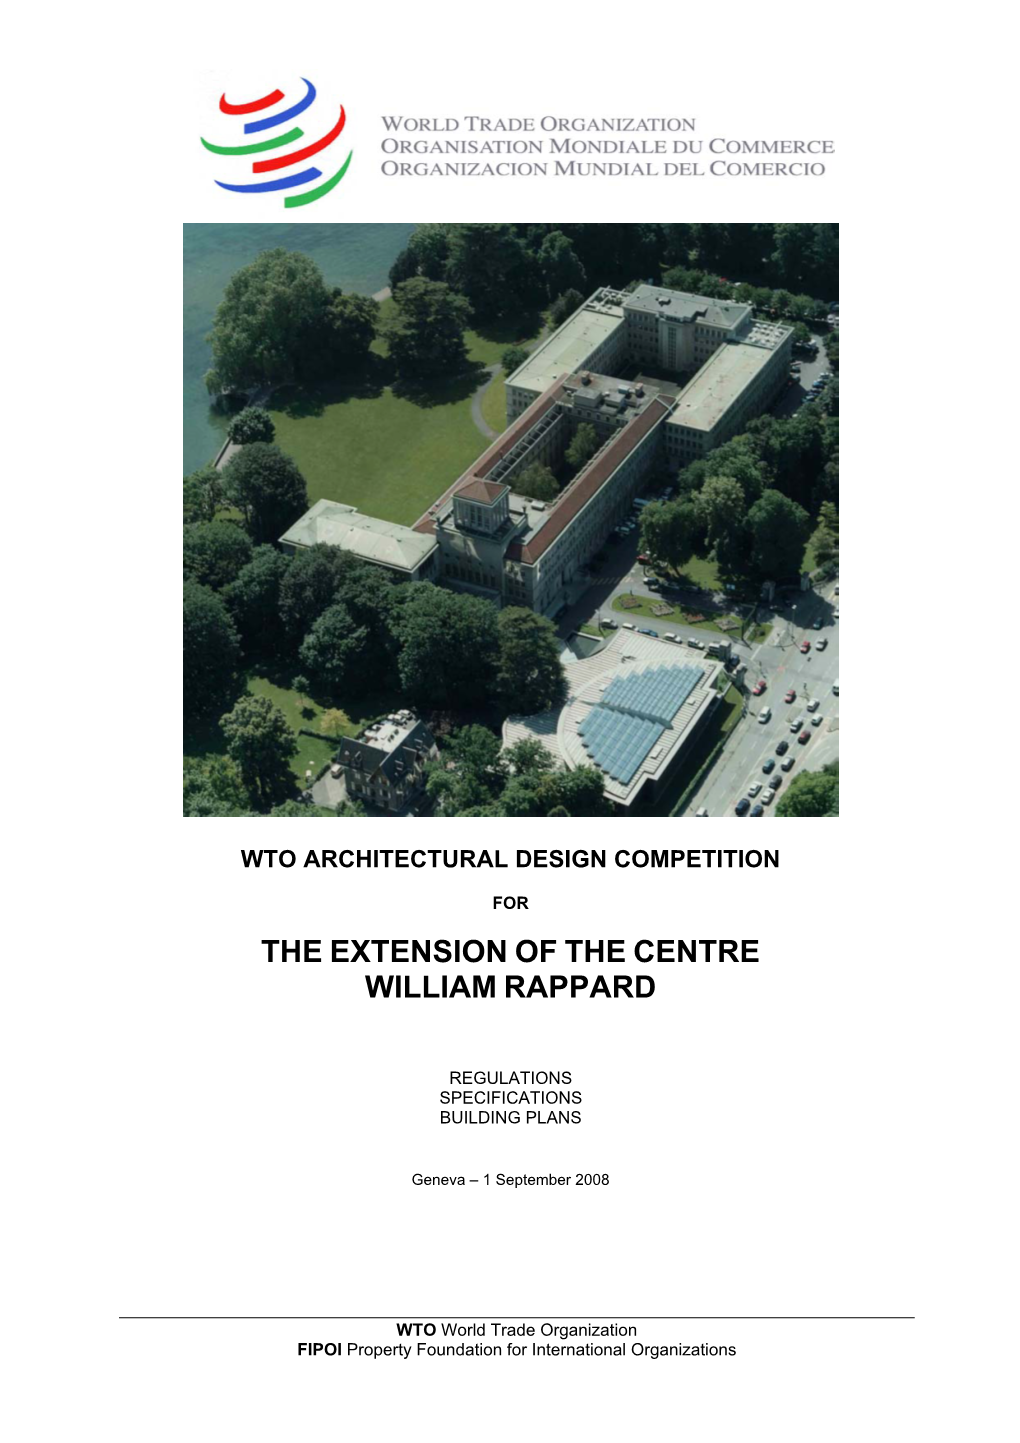 The Extension of the Centre William Rappard